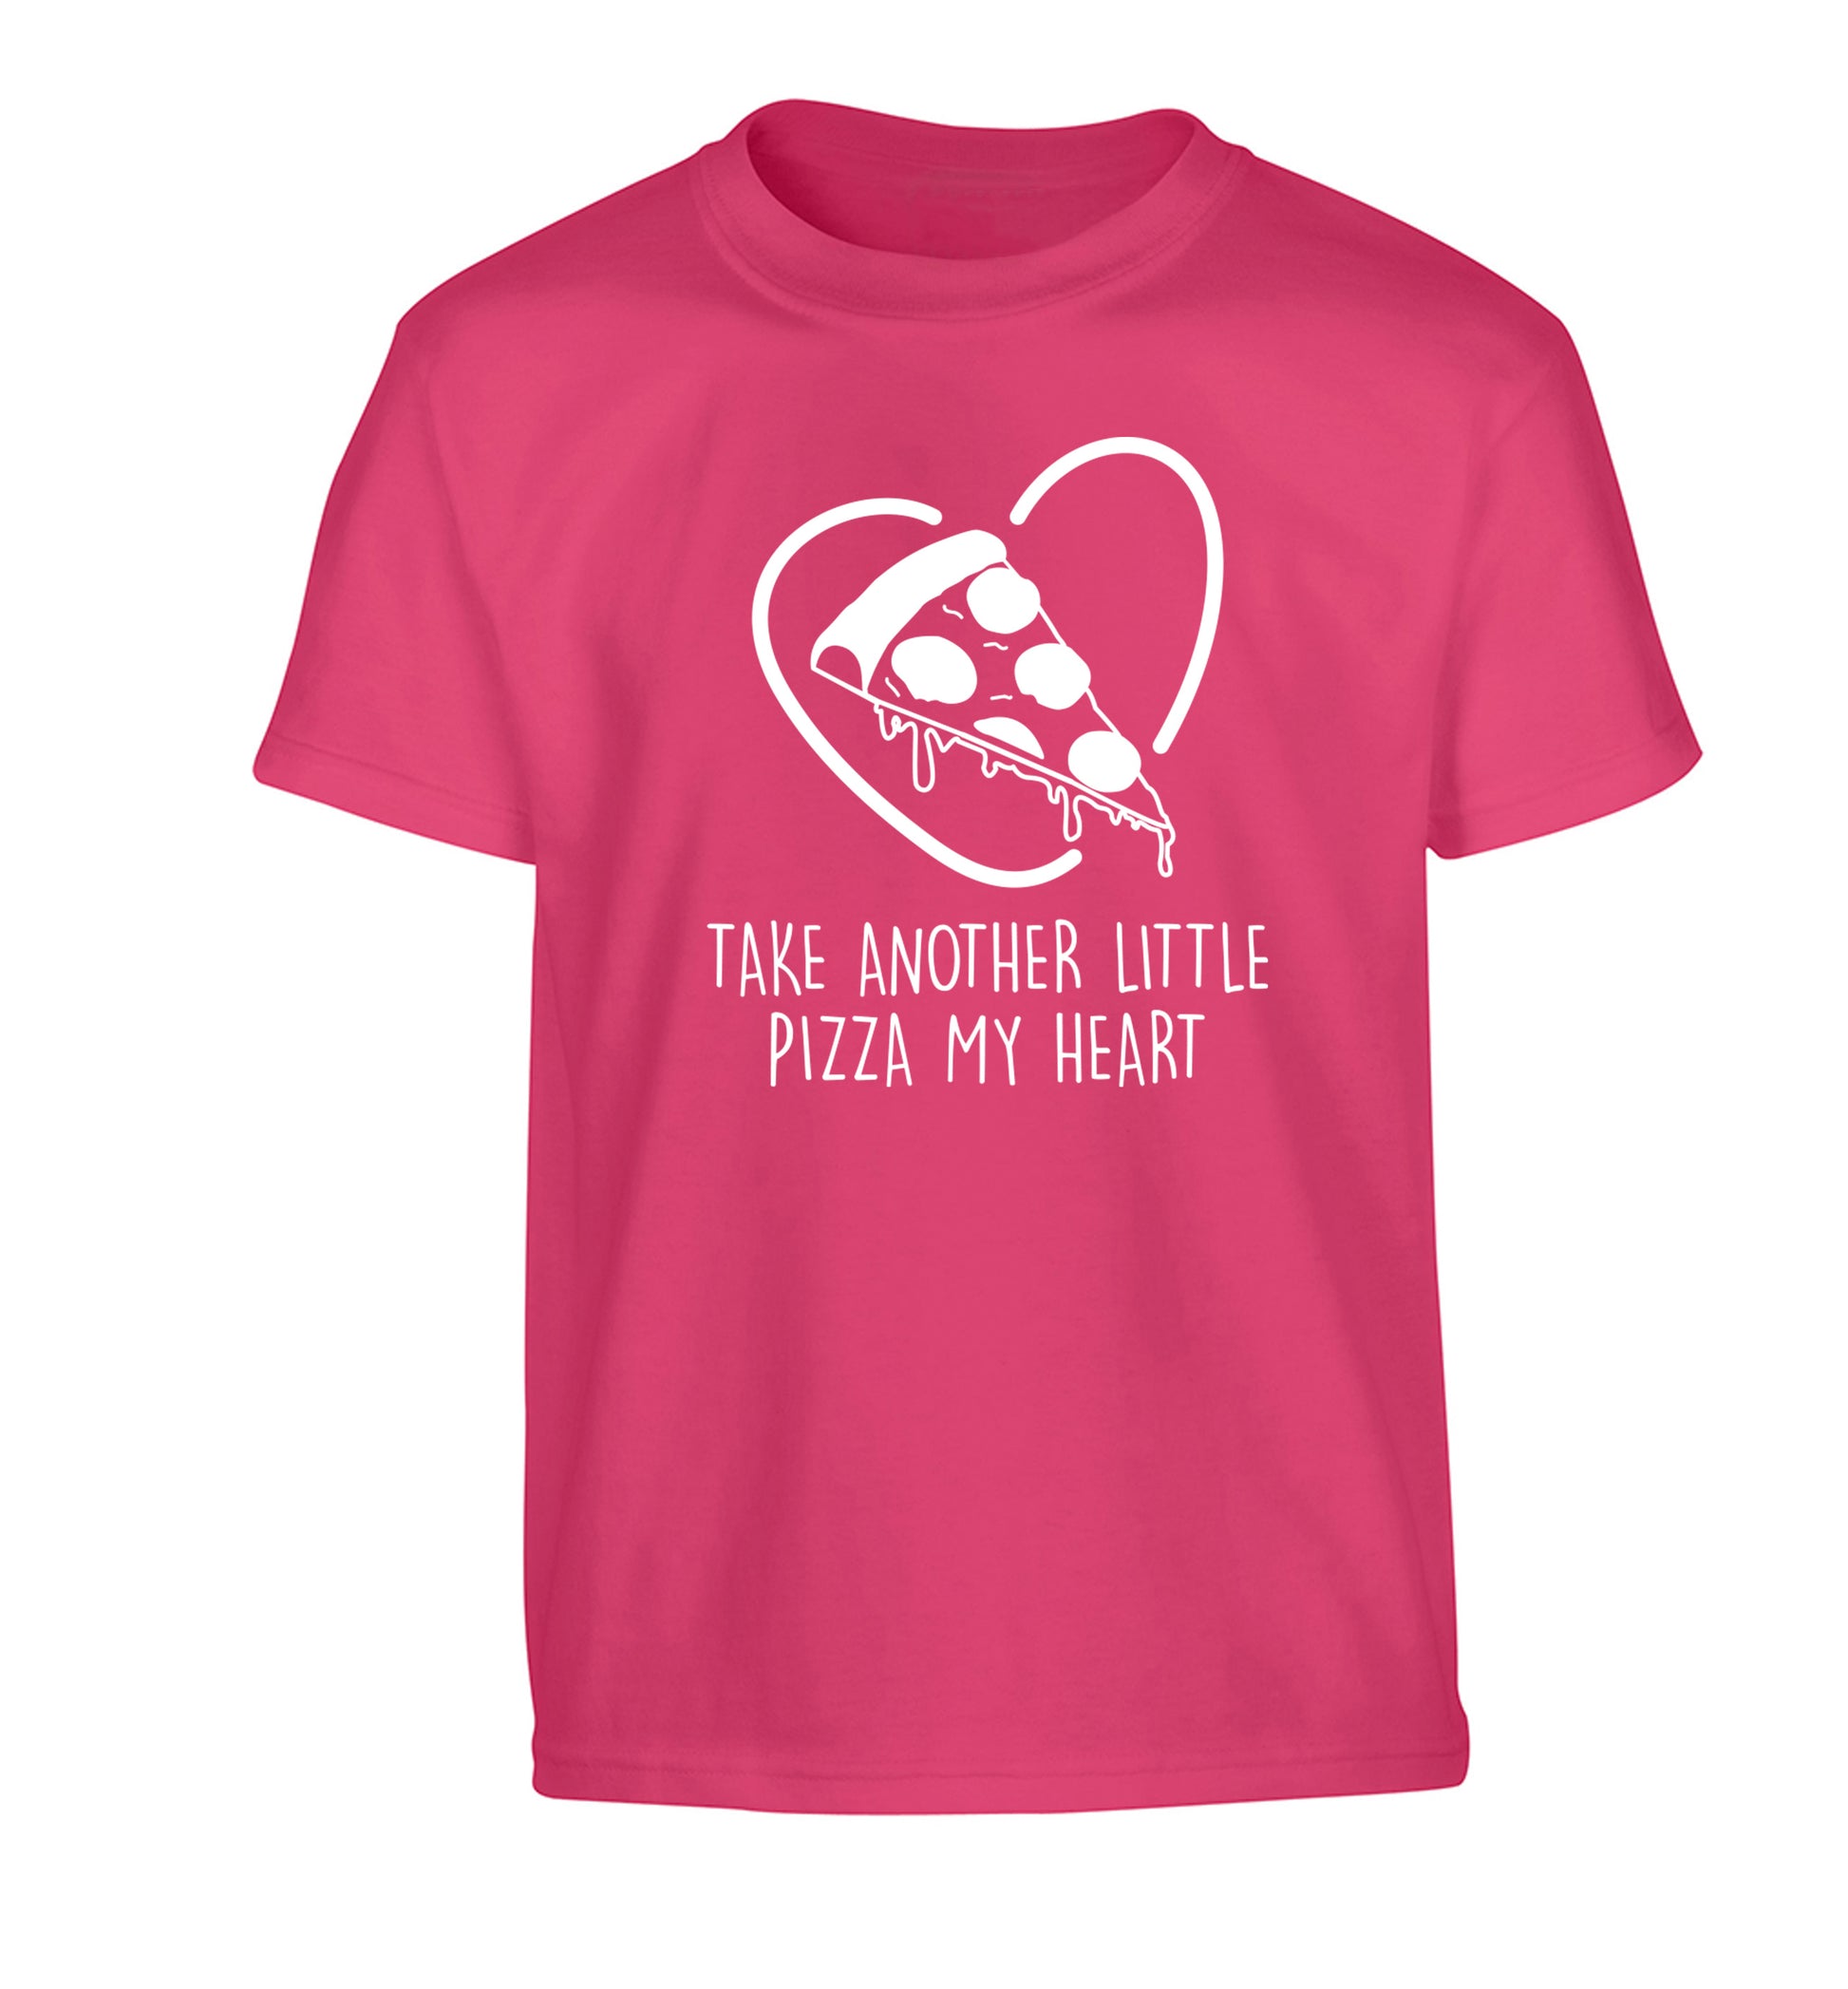 Take another little pizza my heart Children's pink Tshirt 12-13 Years